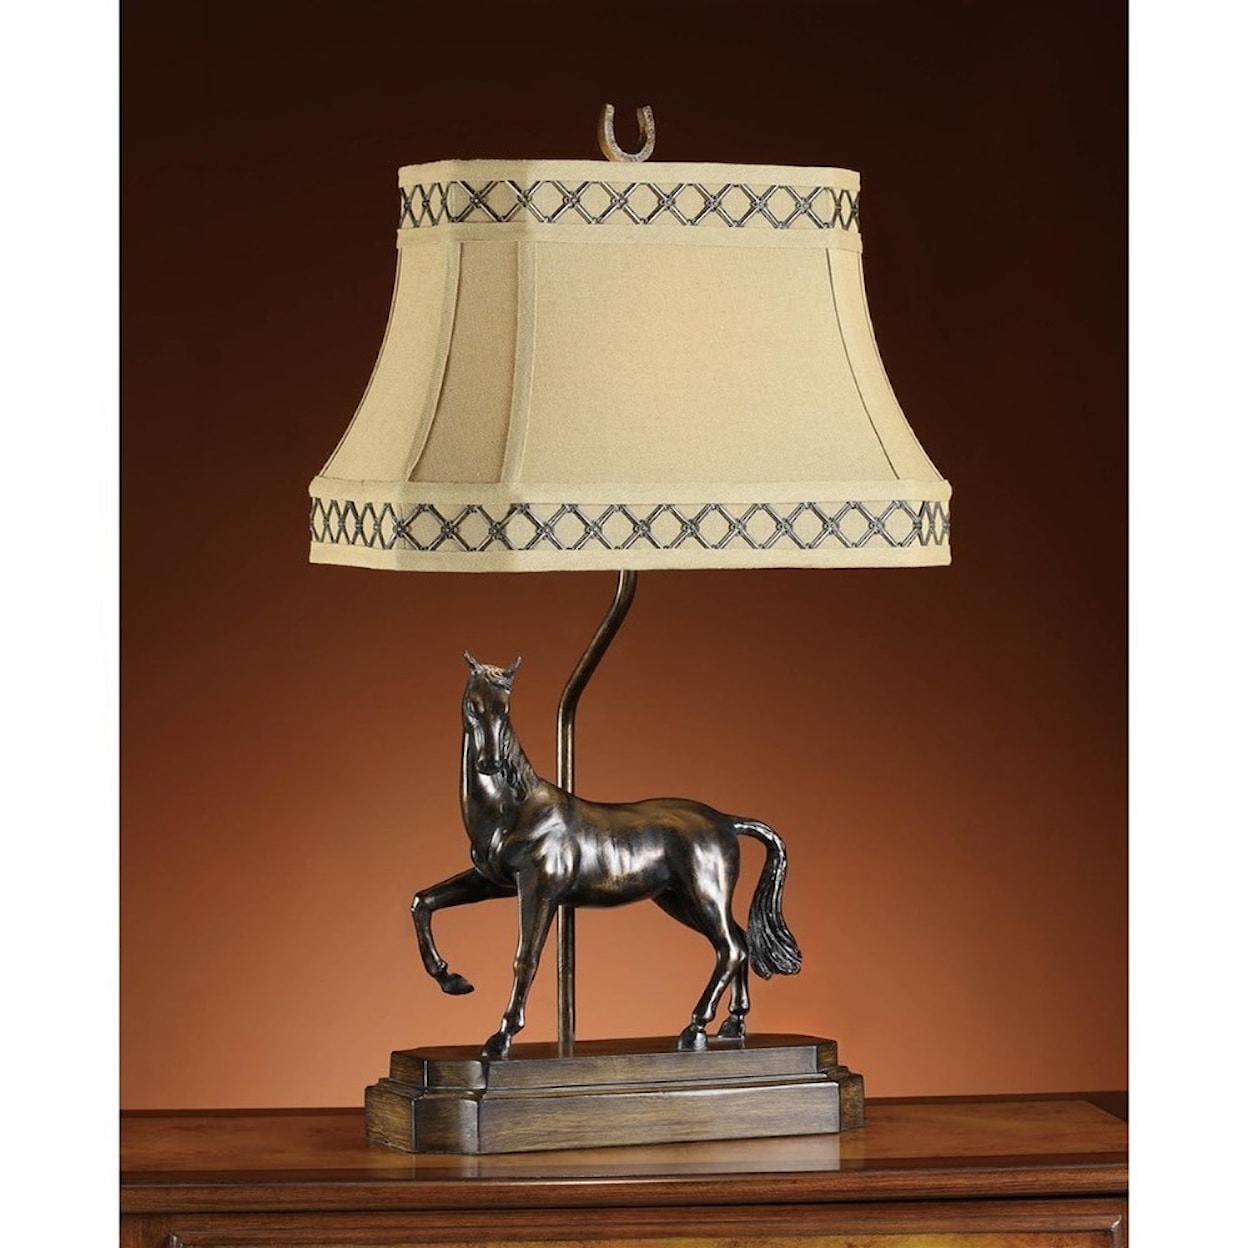 Crestview Collection Lighting Prancer Table Lamp